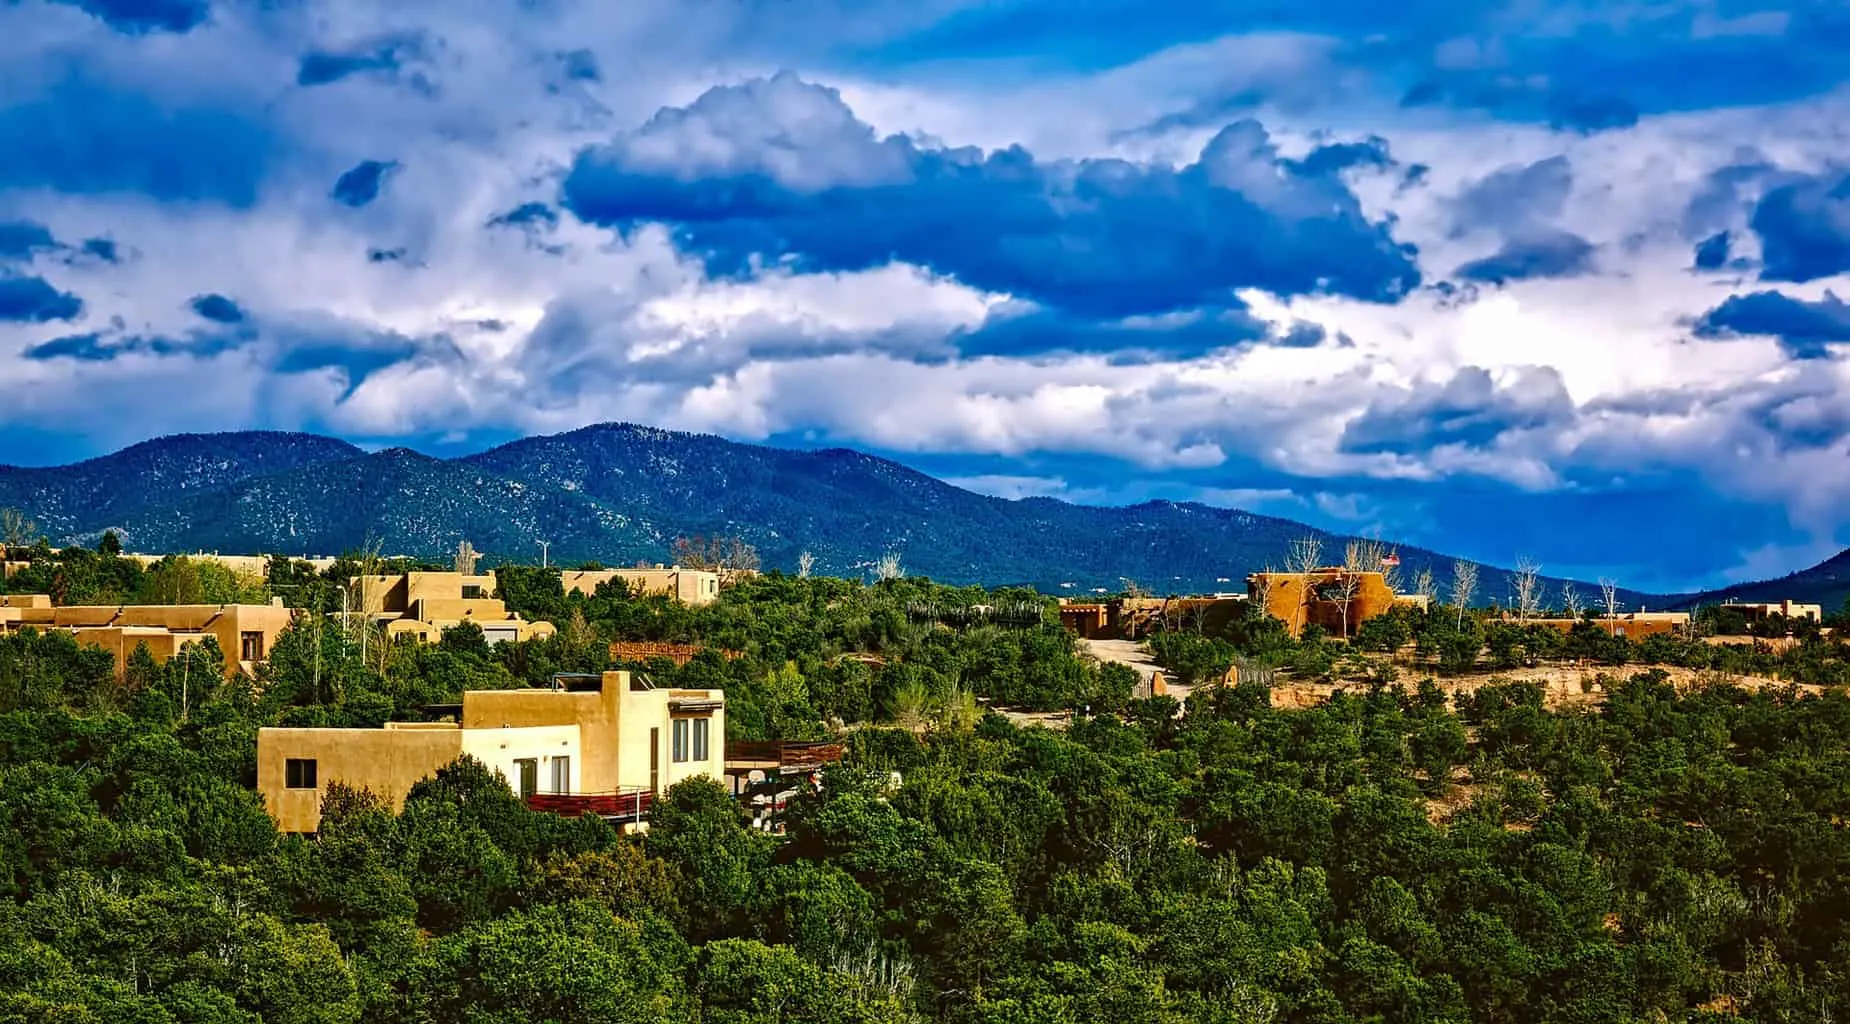 The beautiful, natural landscape of Santa Fe, New Mexico, one of the best places to travel alone in the US.